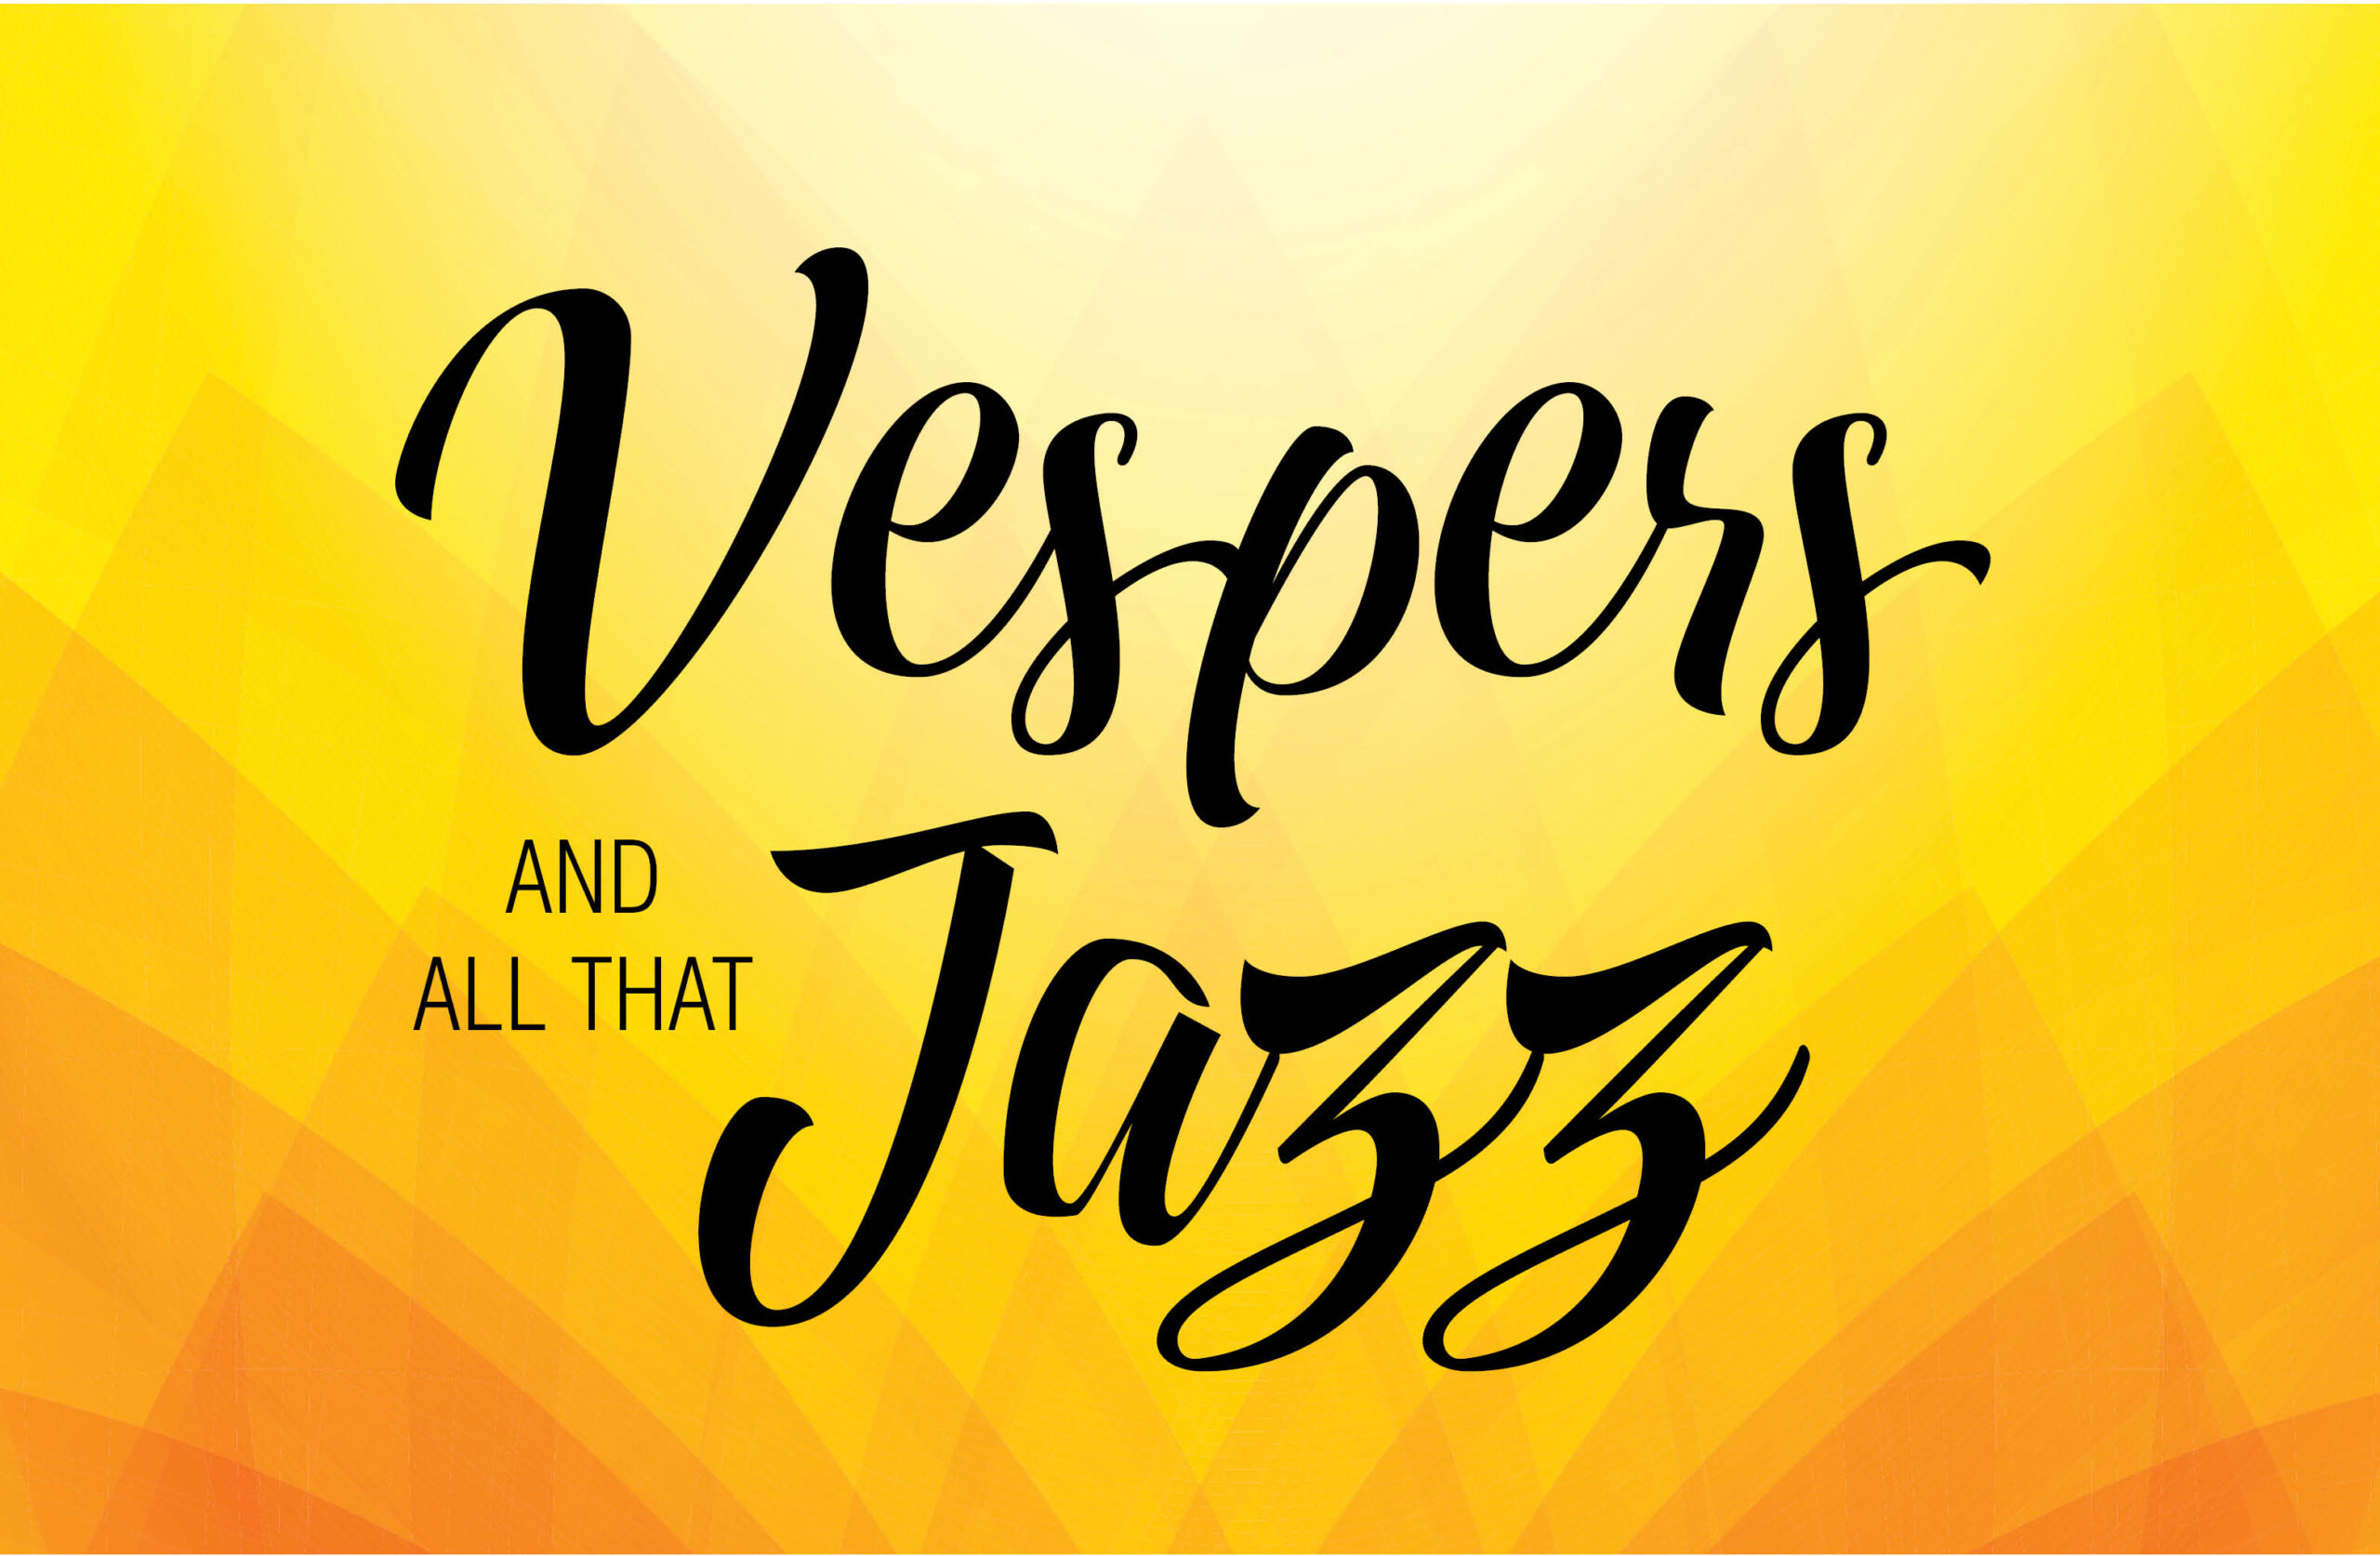 Vespers and All That Jazz